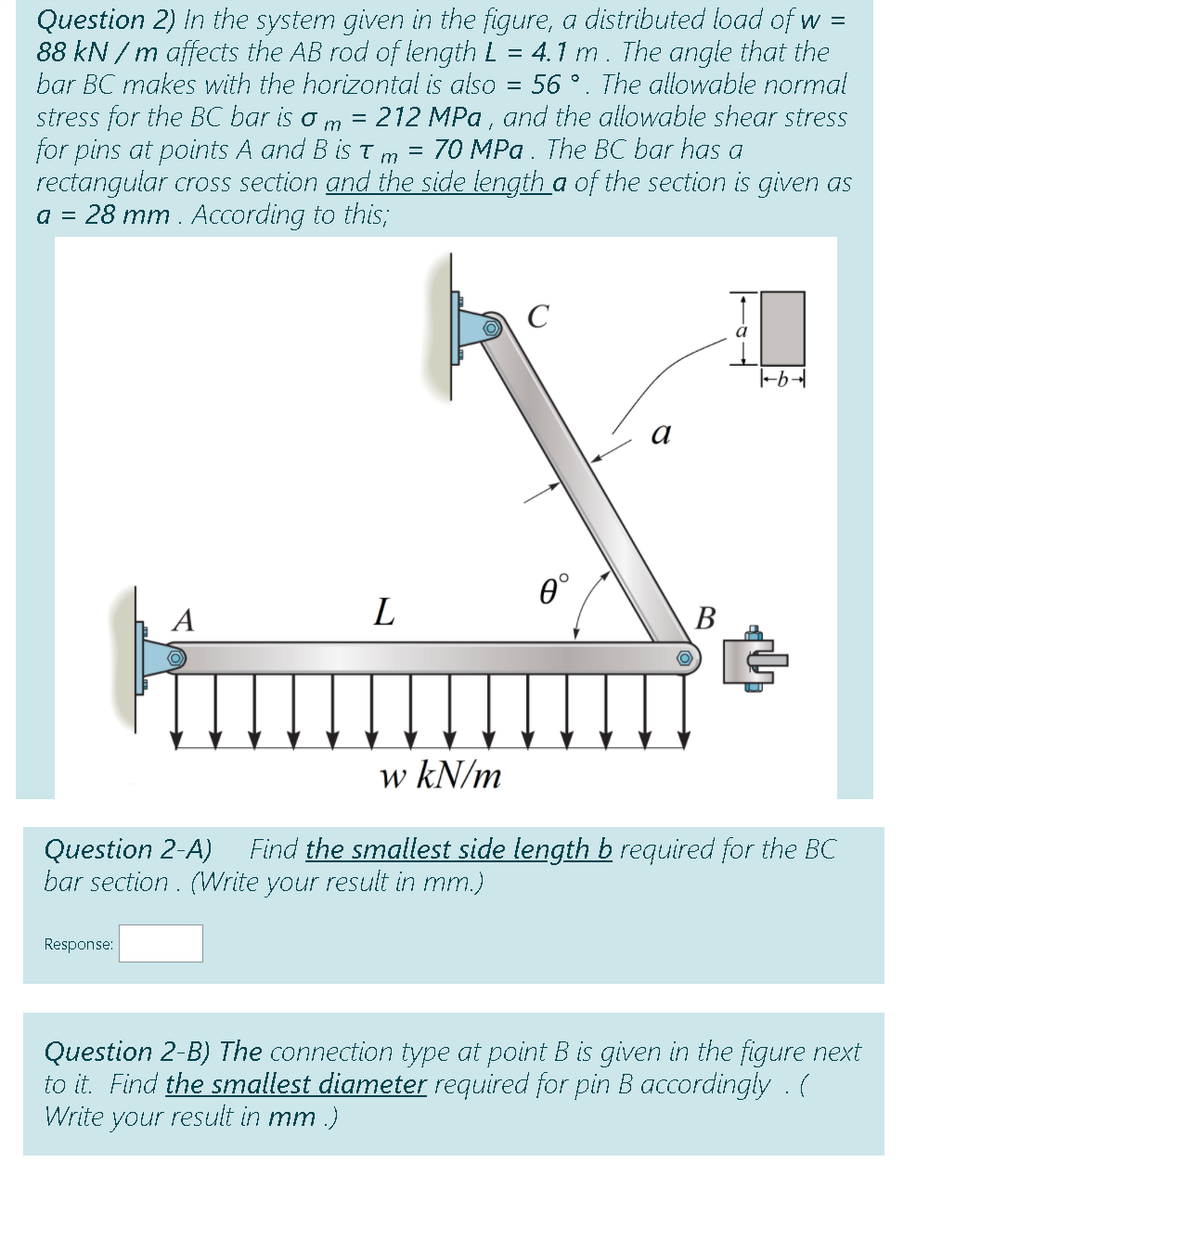 Question 2) In the system given in the figure, a distributed load of w =
88 kN / m affects the AB rod of length L = 4.1 m. The angle that the
bar BC makes with the horizontal is also = 56 °. The allowable normal
stress for the BC bar is
for pins at points A and B is T
rectangular cross section and the side tength a of the section is given as
a = 28 mm . According to this;
212 MPa , and the allowable shear stress
70 MPa. The BC bar has a
%3D
m
m
C
0°
A
В
w kN/m
Find the smallest side length b required for the BC
Question 2-A)
bar section. (Write your result in mm.)
Response:
Question 2-B) The connection type at point B is given in the figure next
to it. Find the smallest diameter required for pin B accordingly . (
Write your result in mm .)
